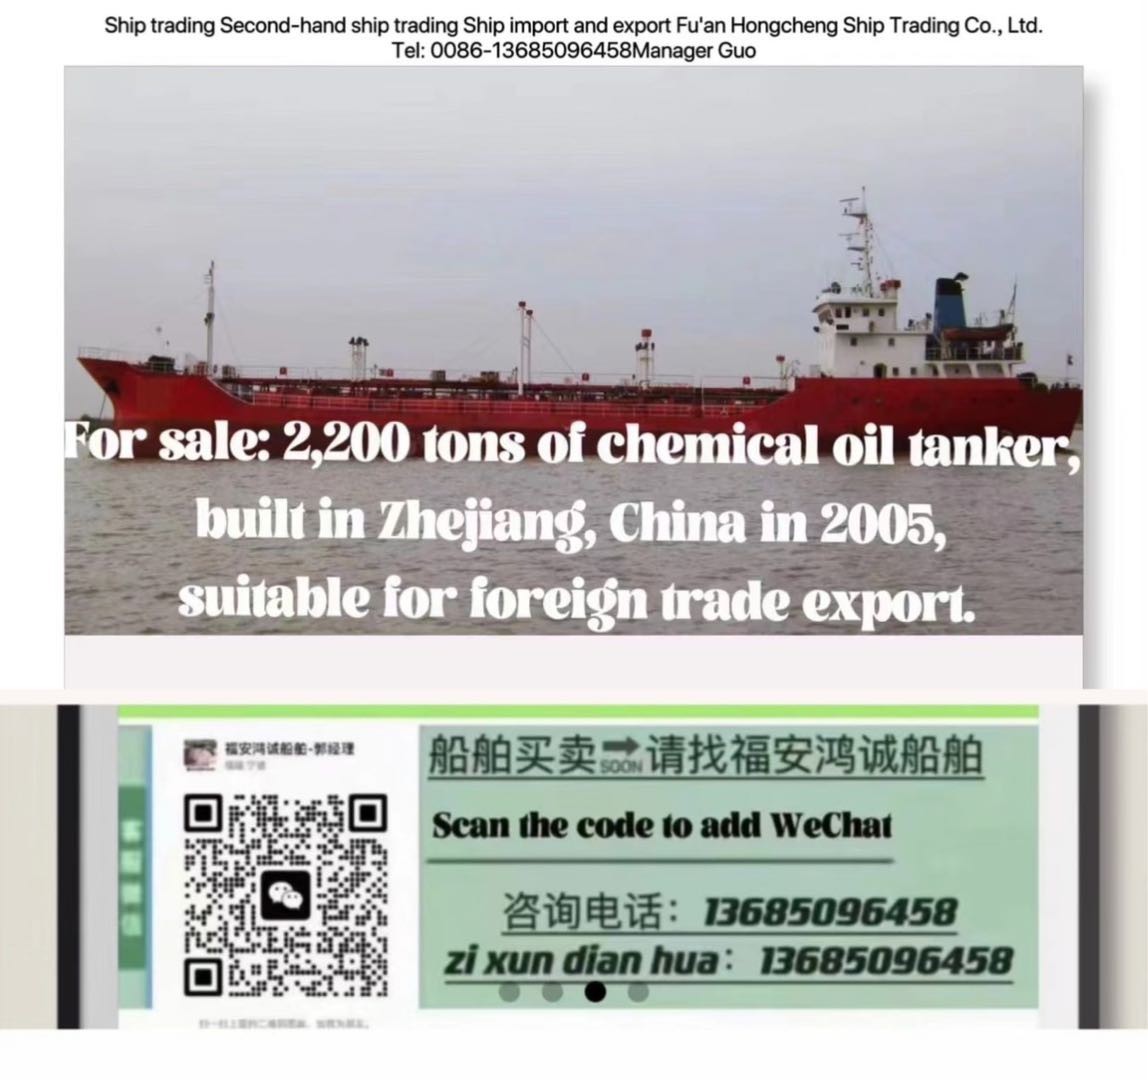 For sale: 2,200 tons of chemical oil tanker, built in Zhejiang, China in 2005,